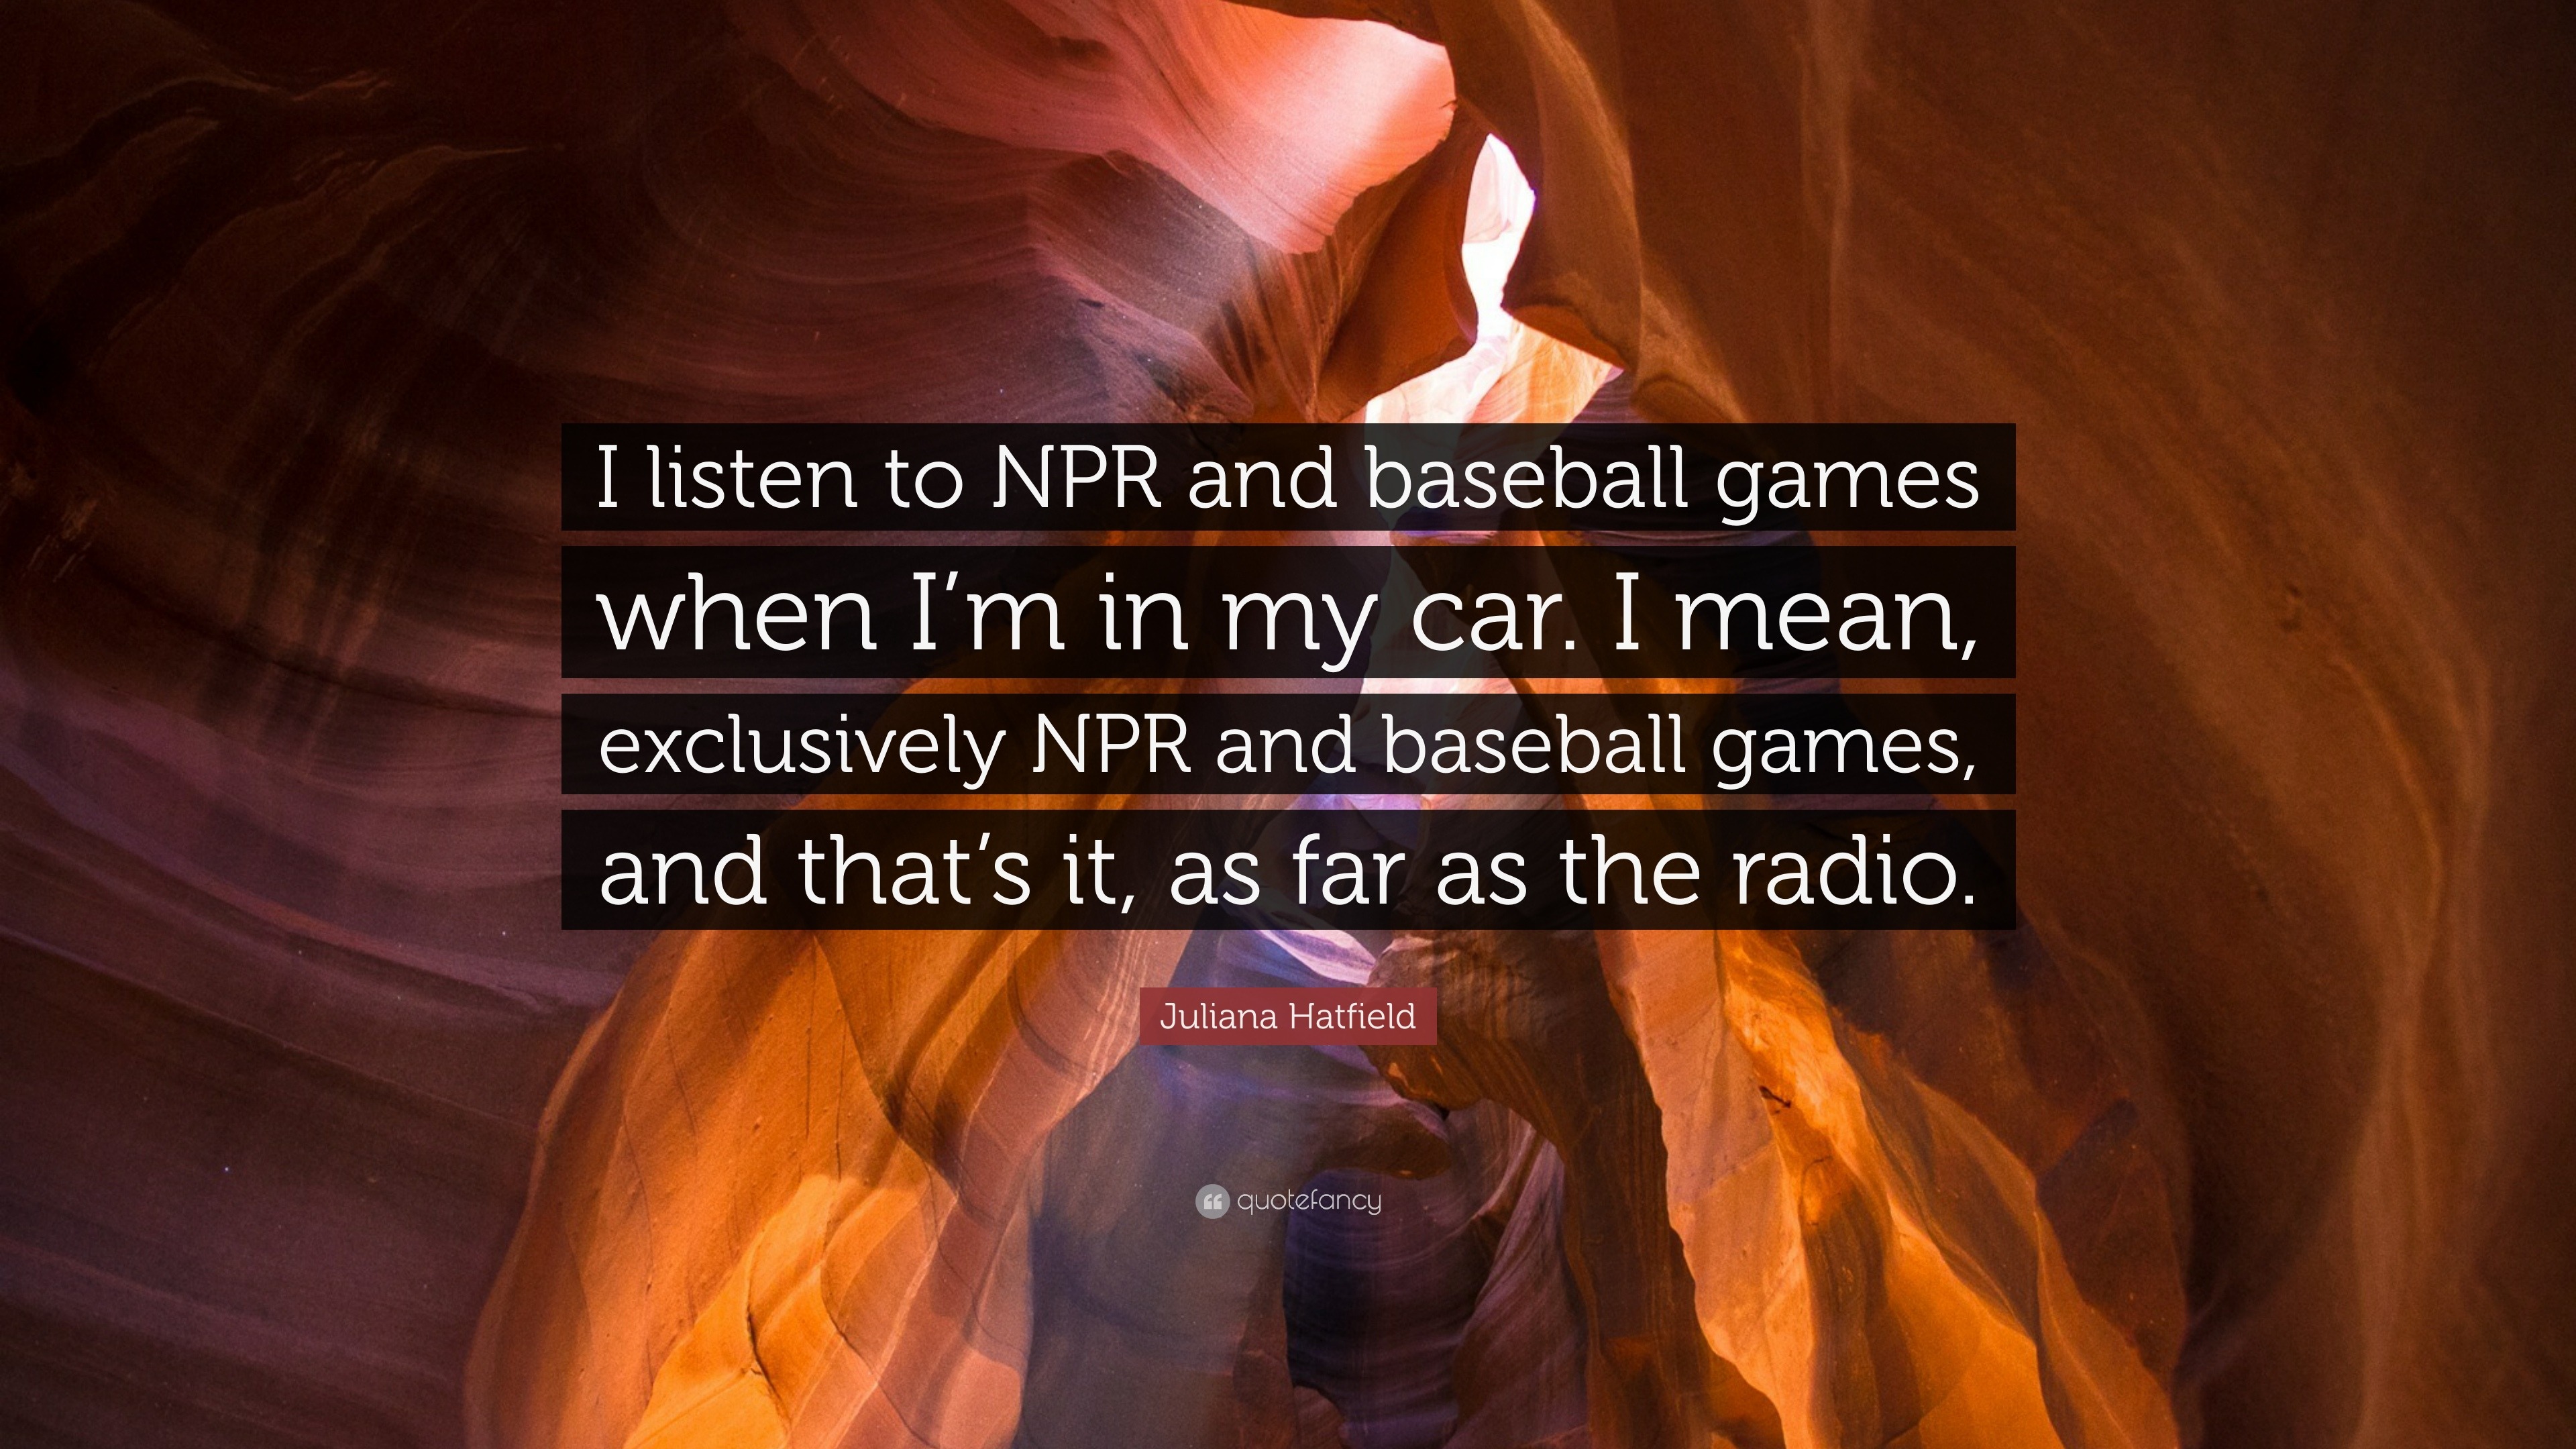 Juliana Hatfield Quote “I listen to NPR and baseball games when Im in my car